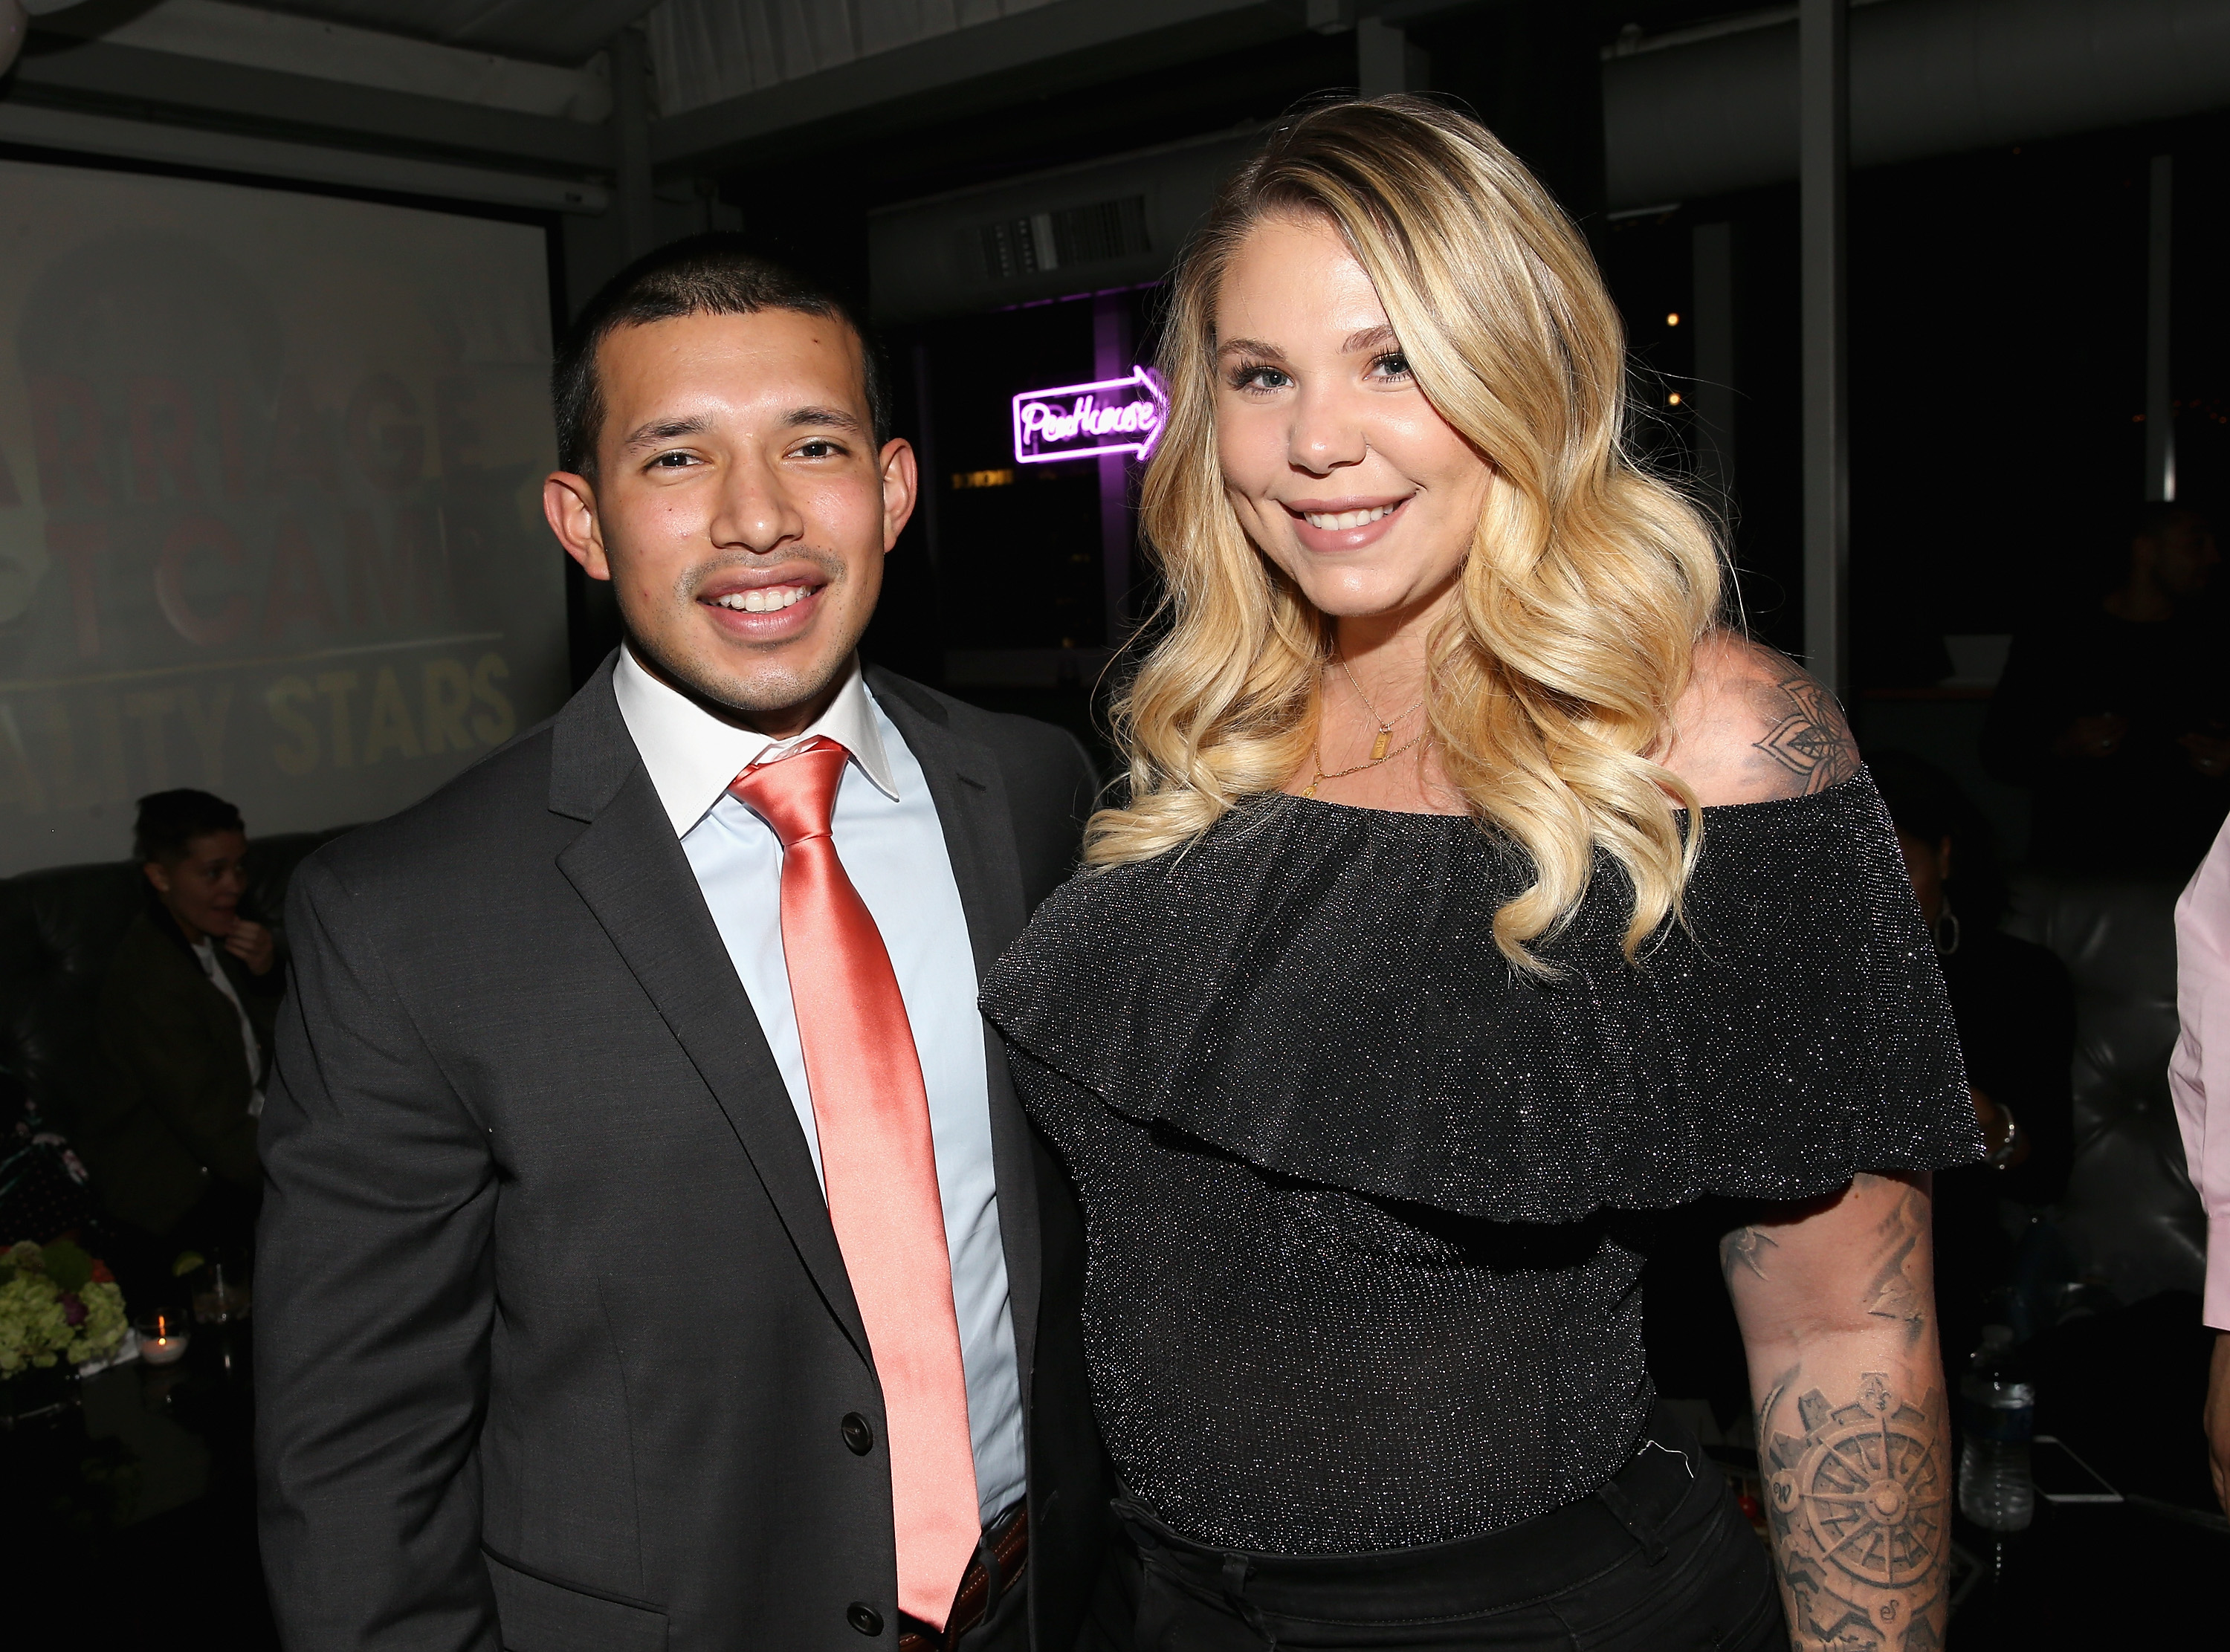 Javi Marroquin and Kailyn Lowry in New York City in 2017